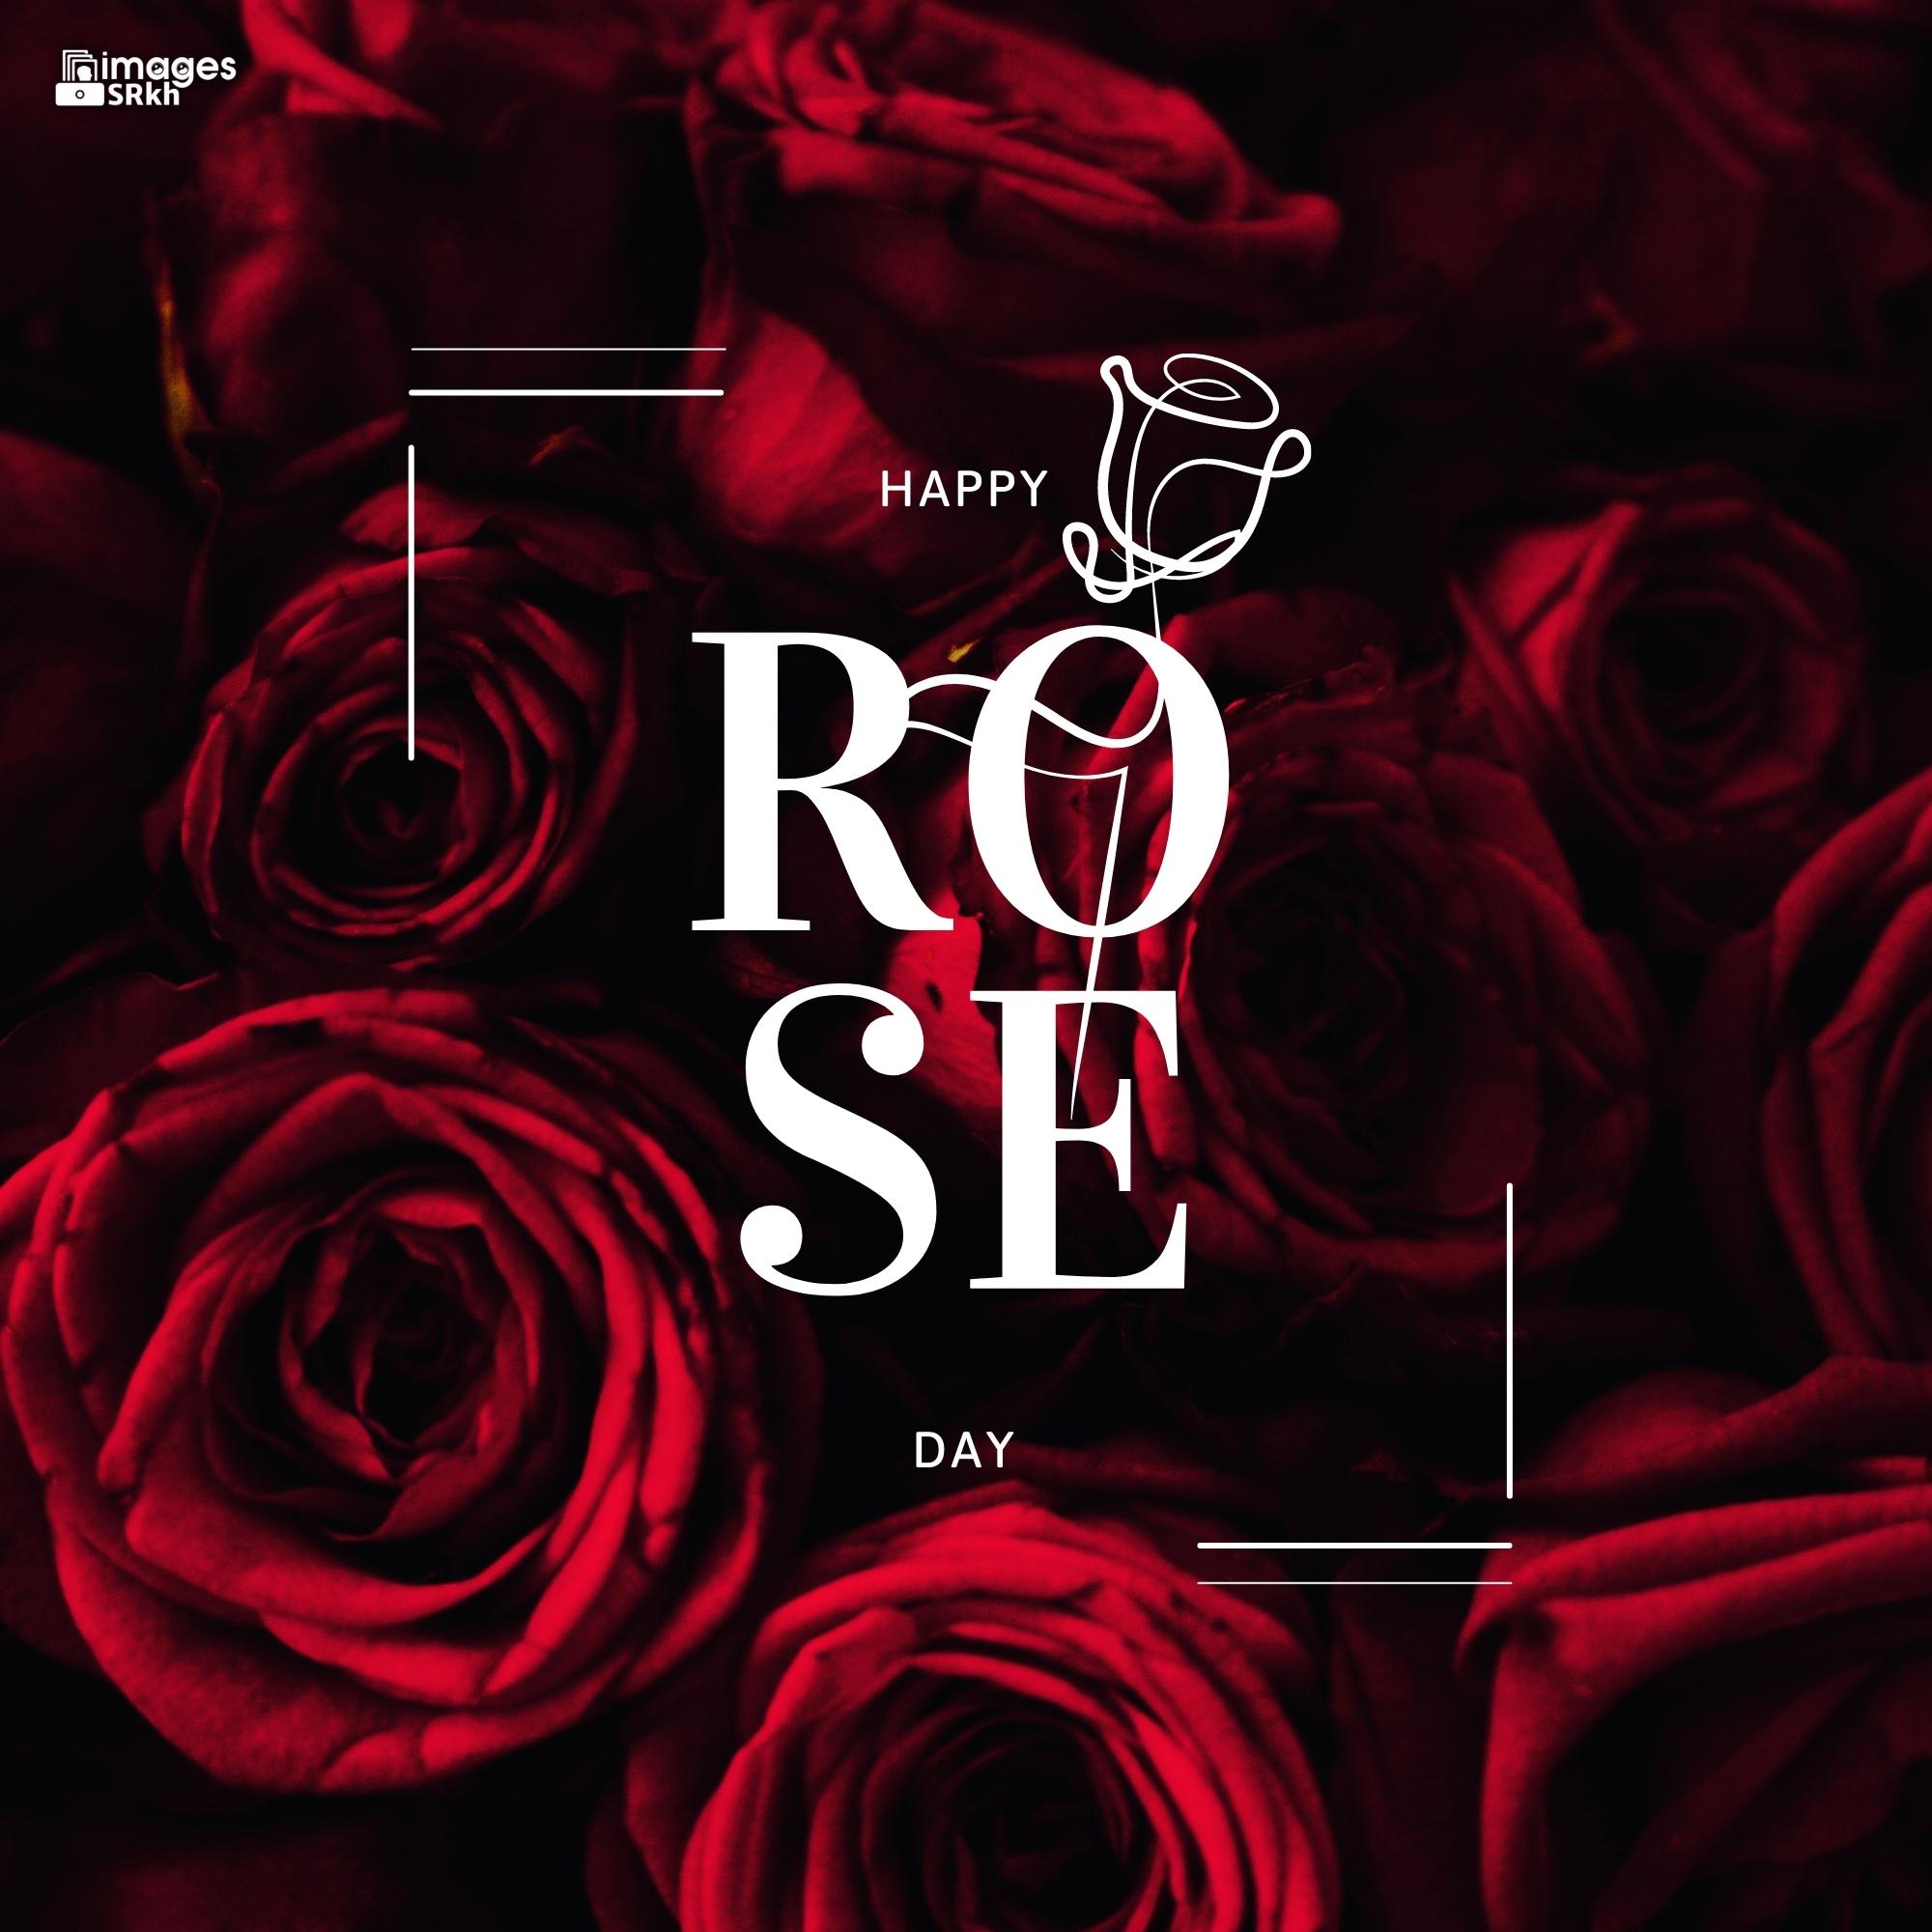 Happy Rose Day Image Hd Download (98)